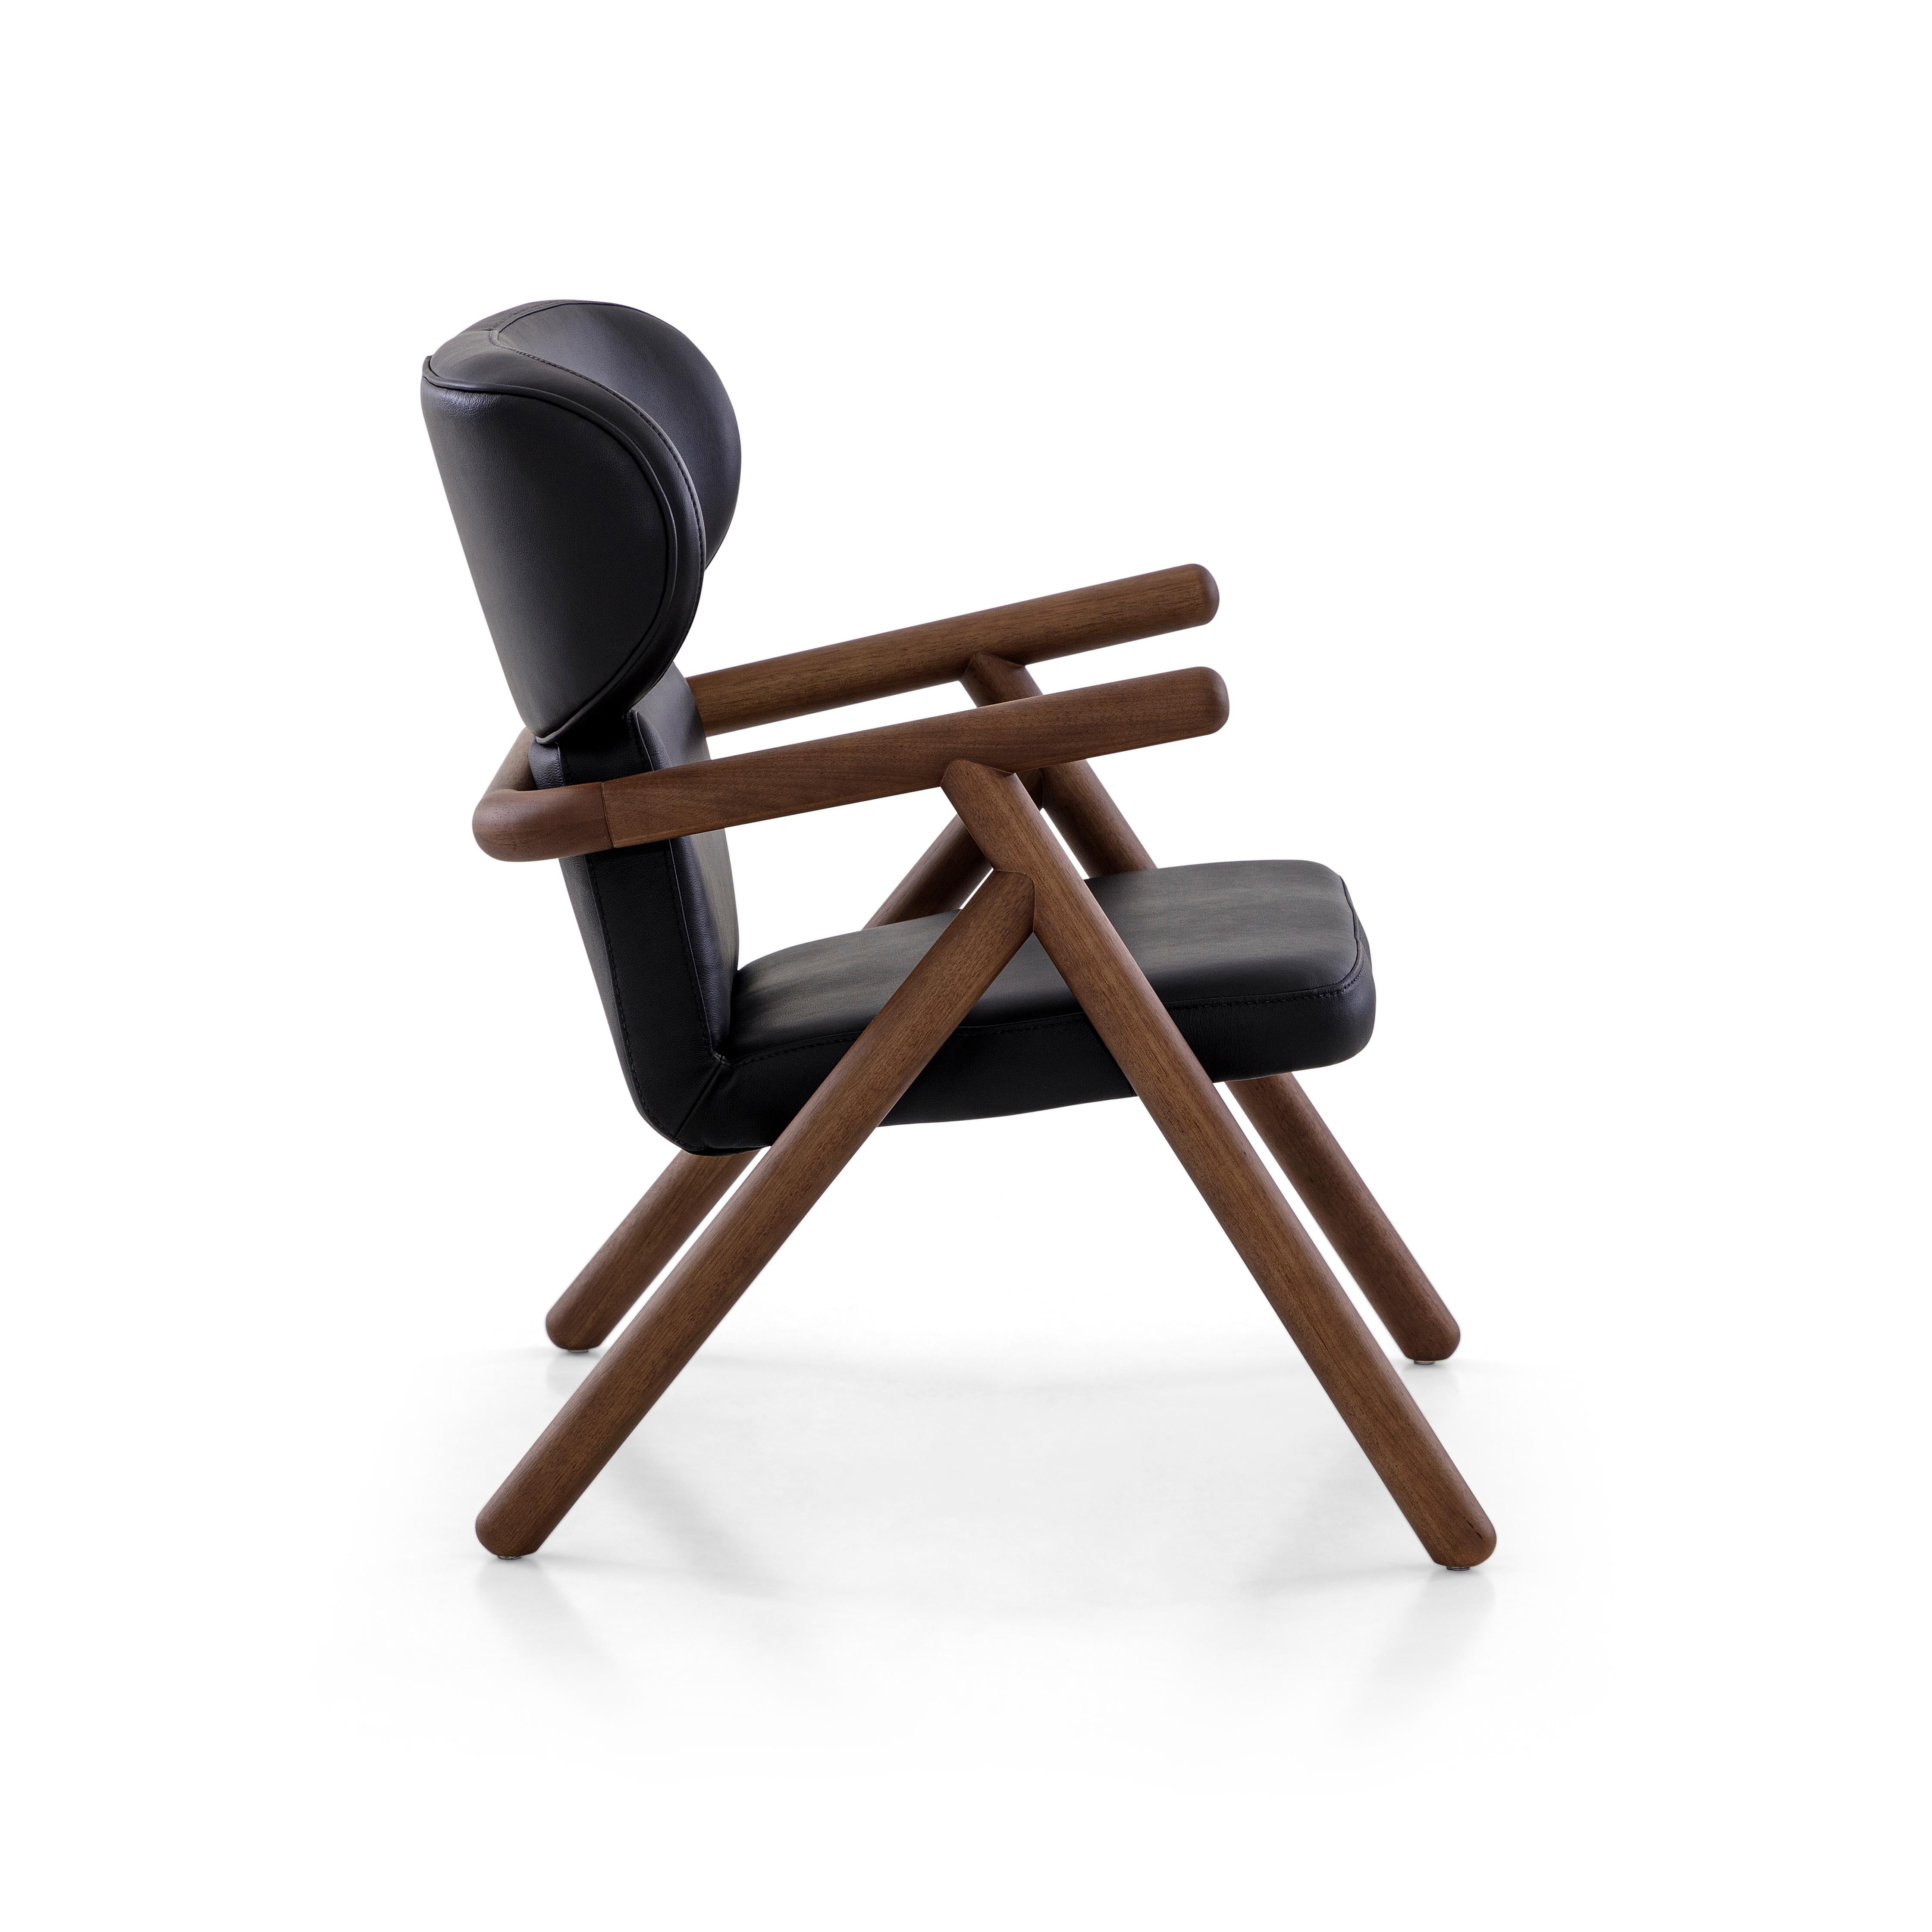 The Sole armchair is an interpretation of the Scandinavian style with a walnut wooden shell finish multi-laminated and upholstered black leather covering the seat and back. This armchair has been designed by our Uultis team with the best foam and